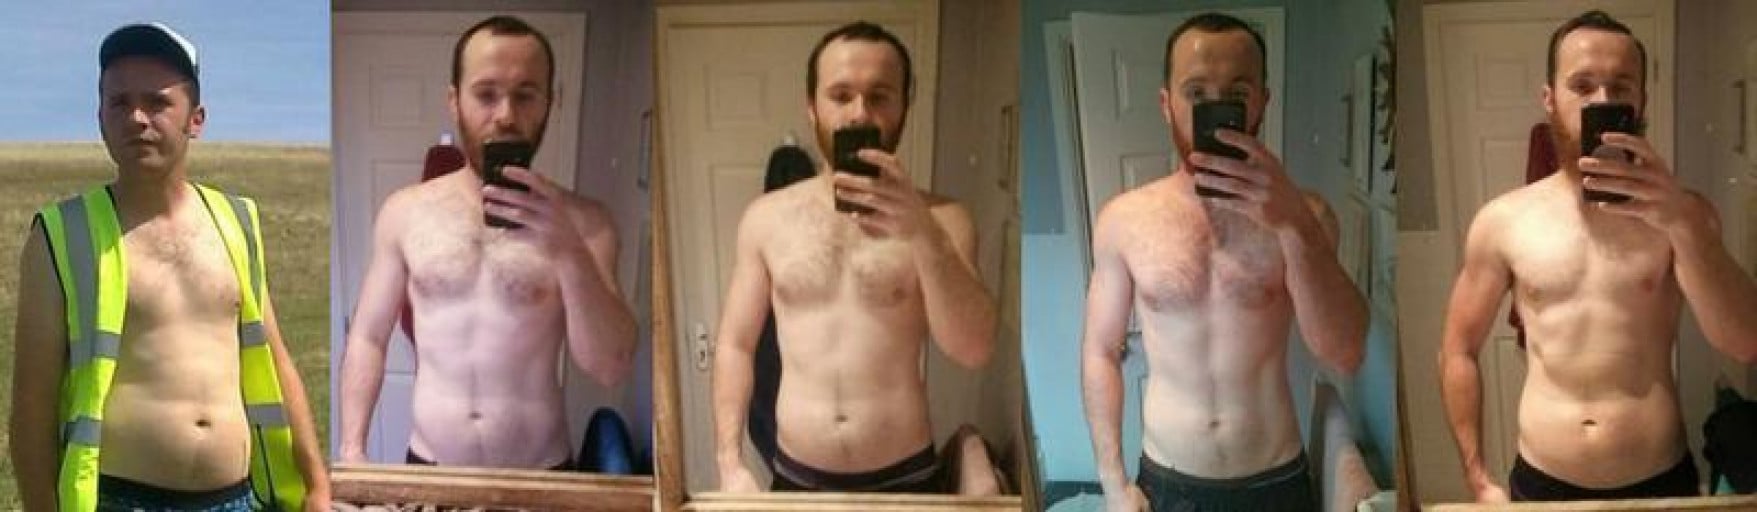 A progress pic of a 6'0" man showing a fat loss from 217 pounds to 178 pounds. A total loss of 39 pounds.